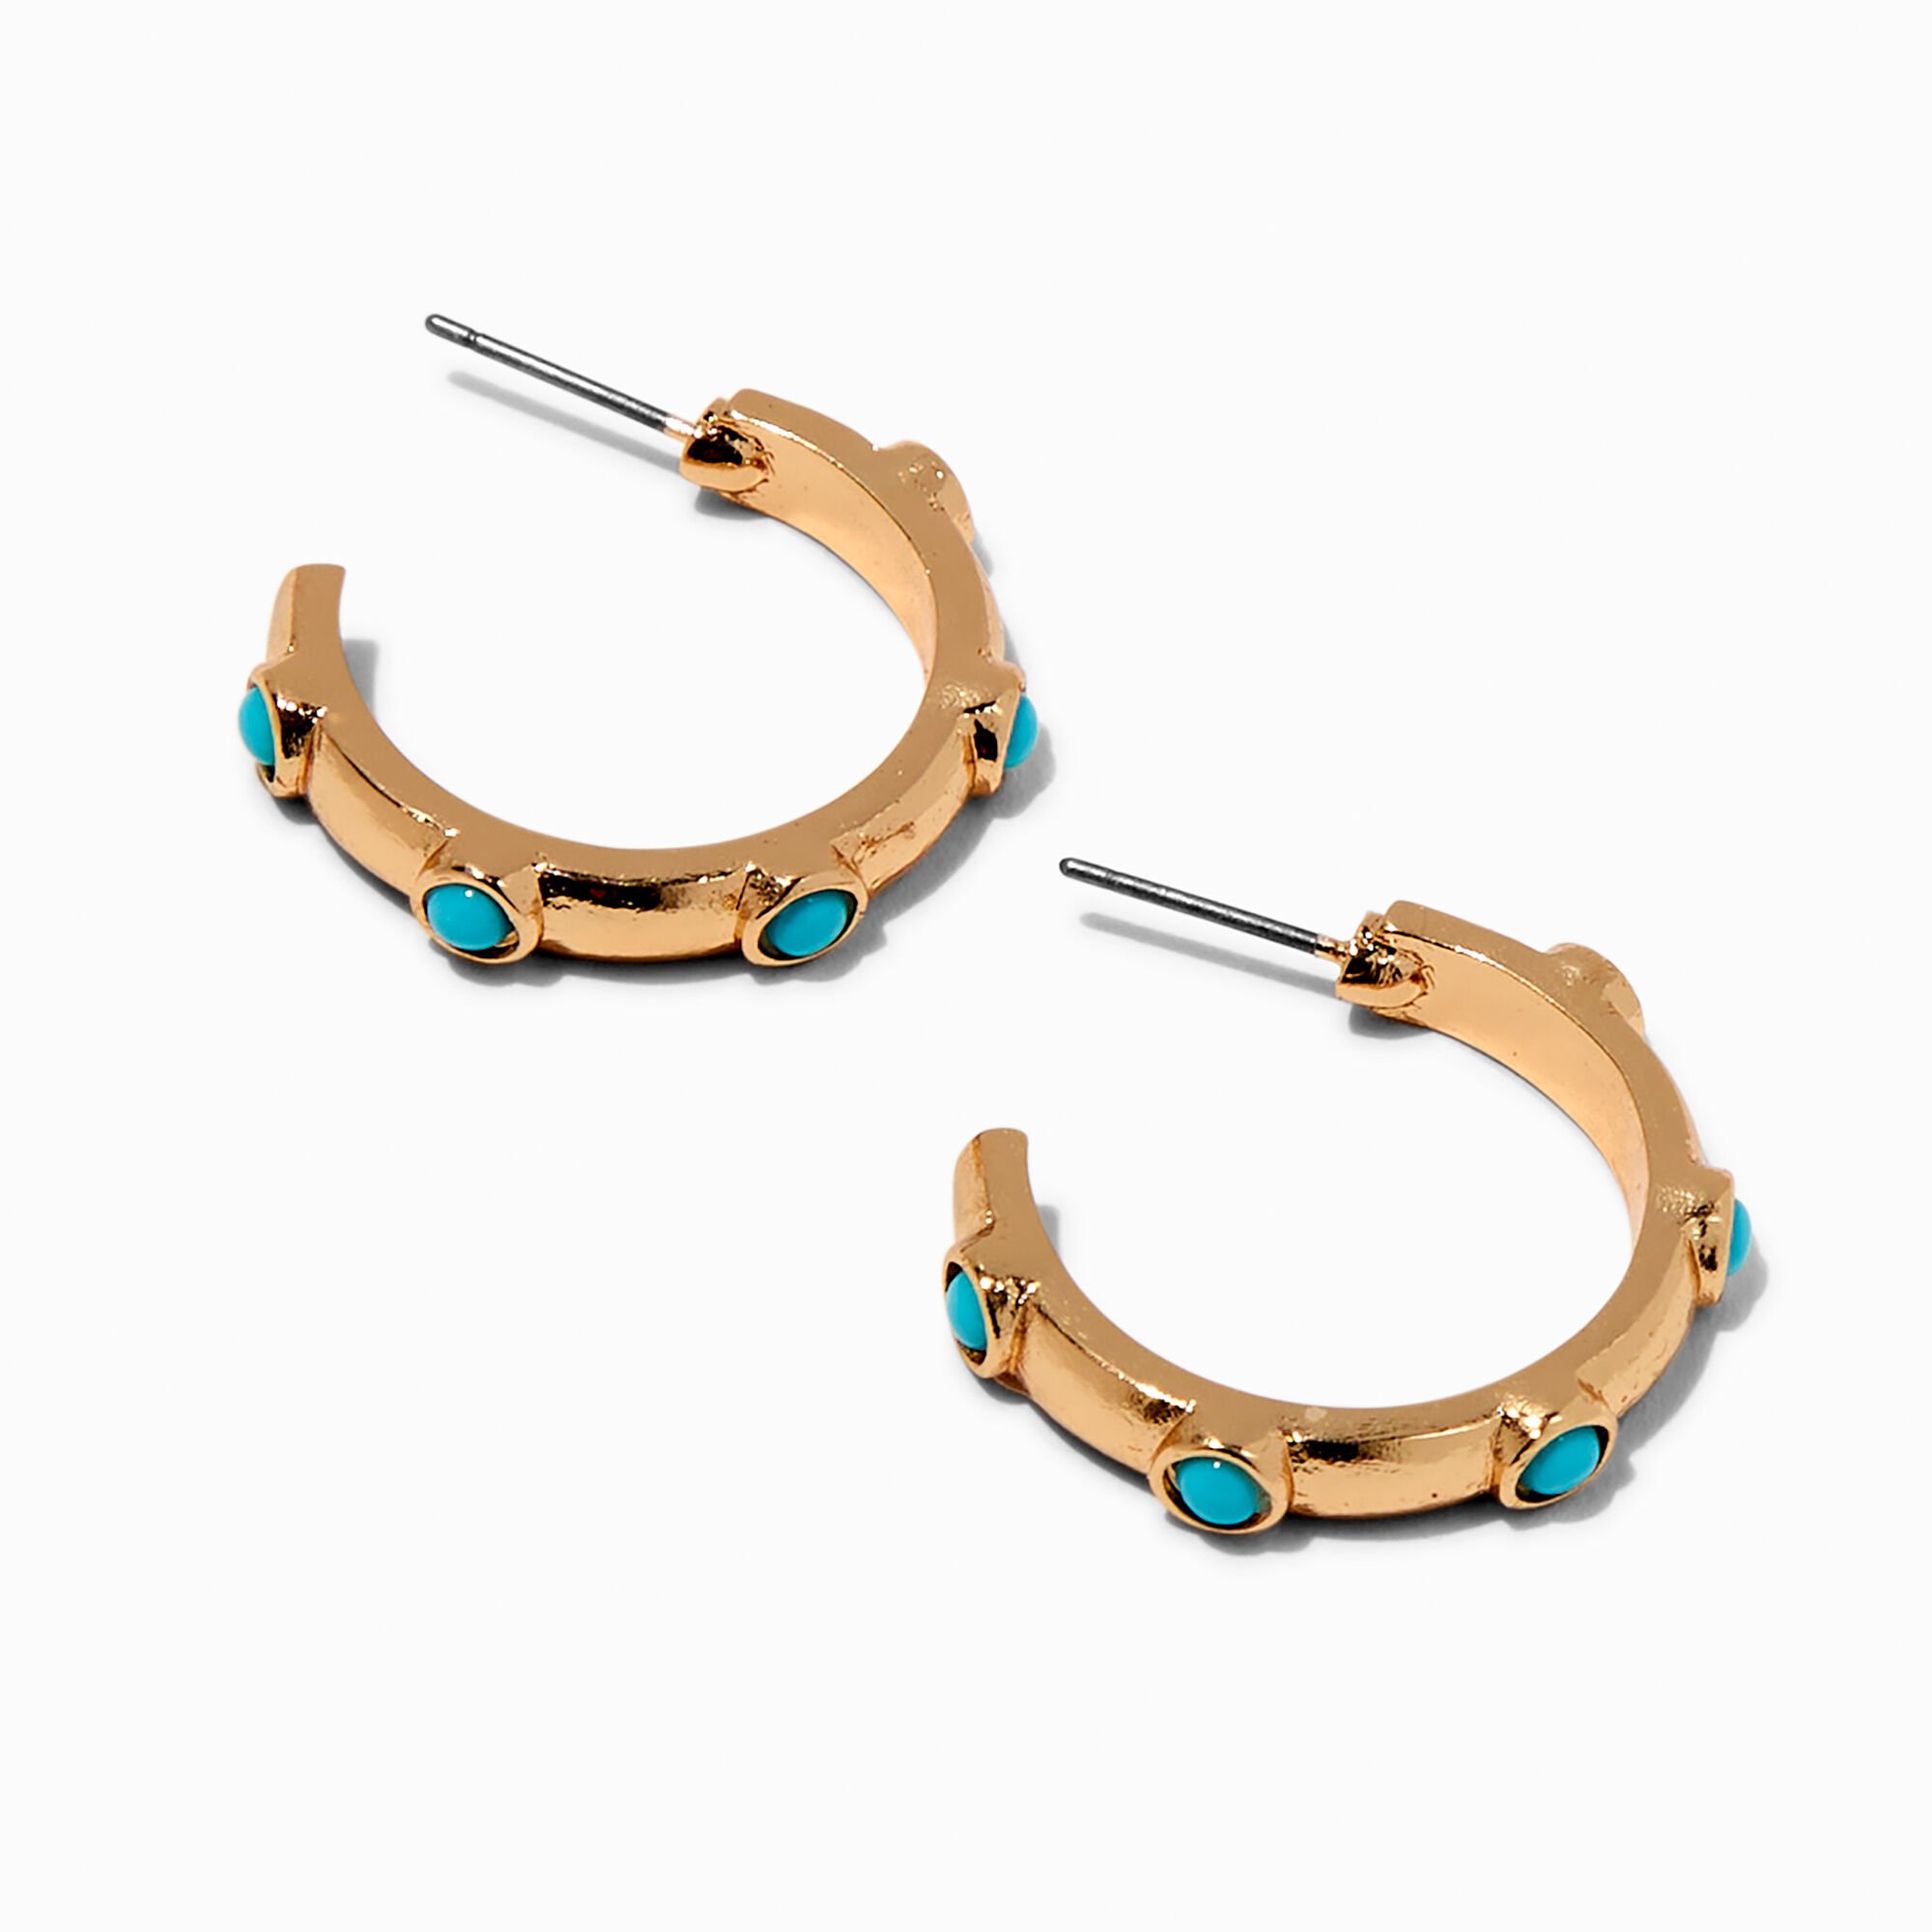 View Claires Inset GoldTone Hoop Earrings Turquoise information